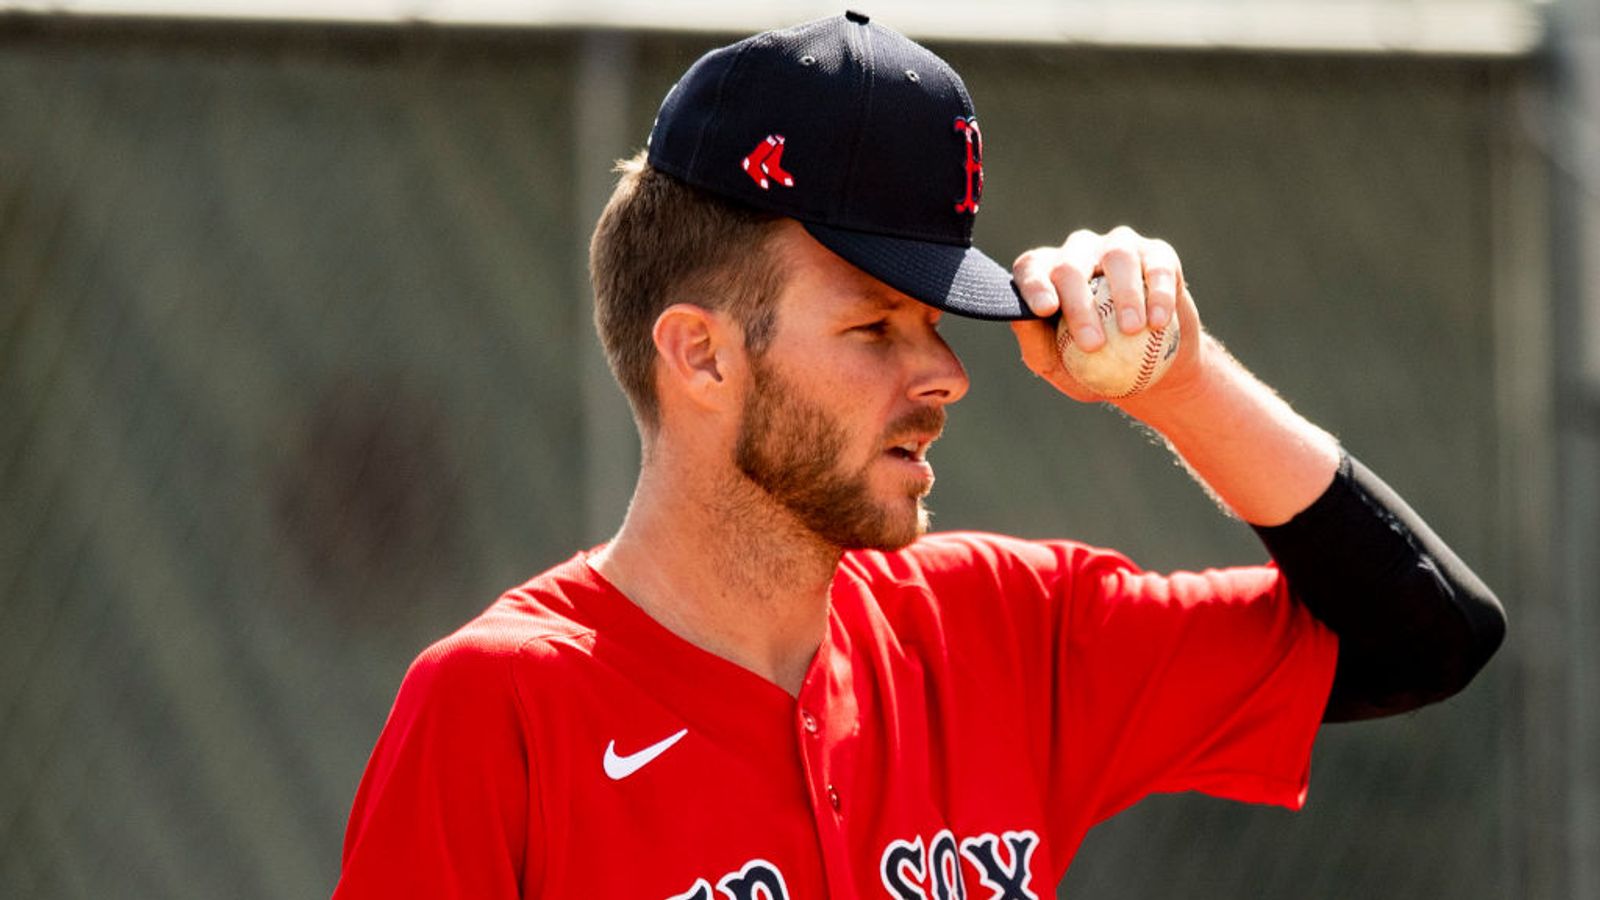 Red Sox starter Chris Sale tests positive for COVID-19